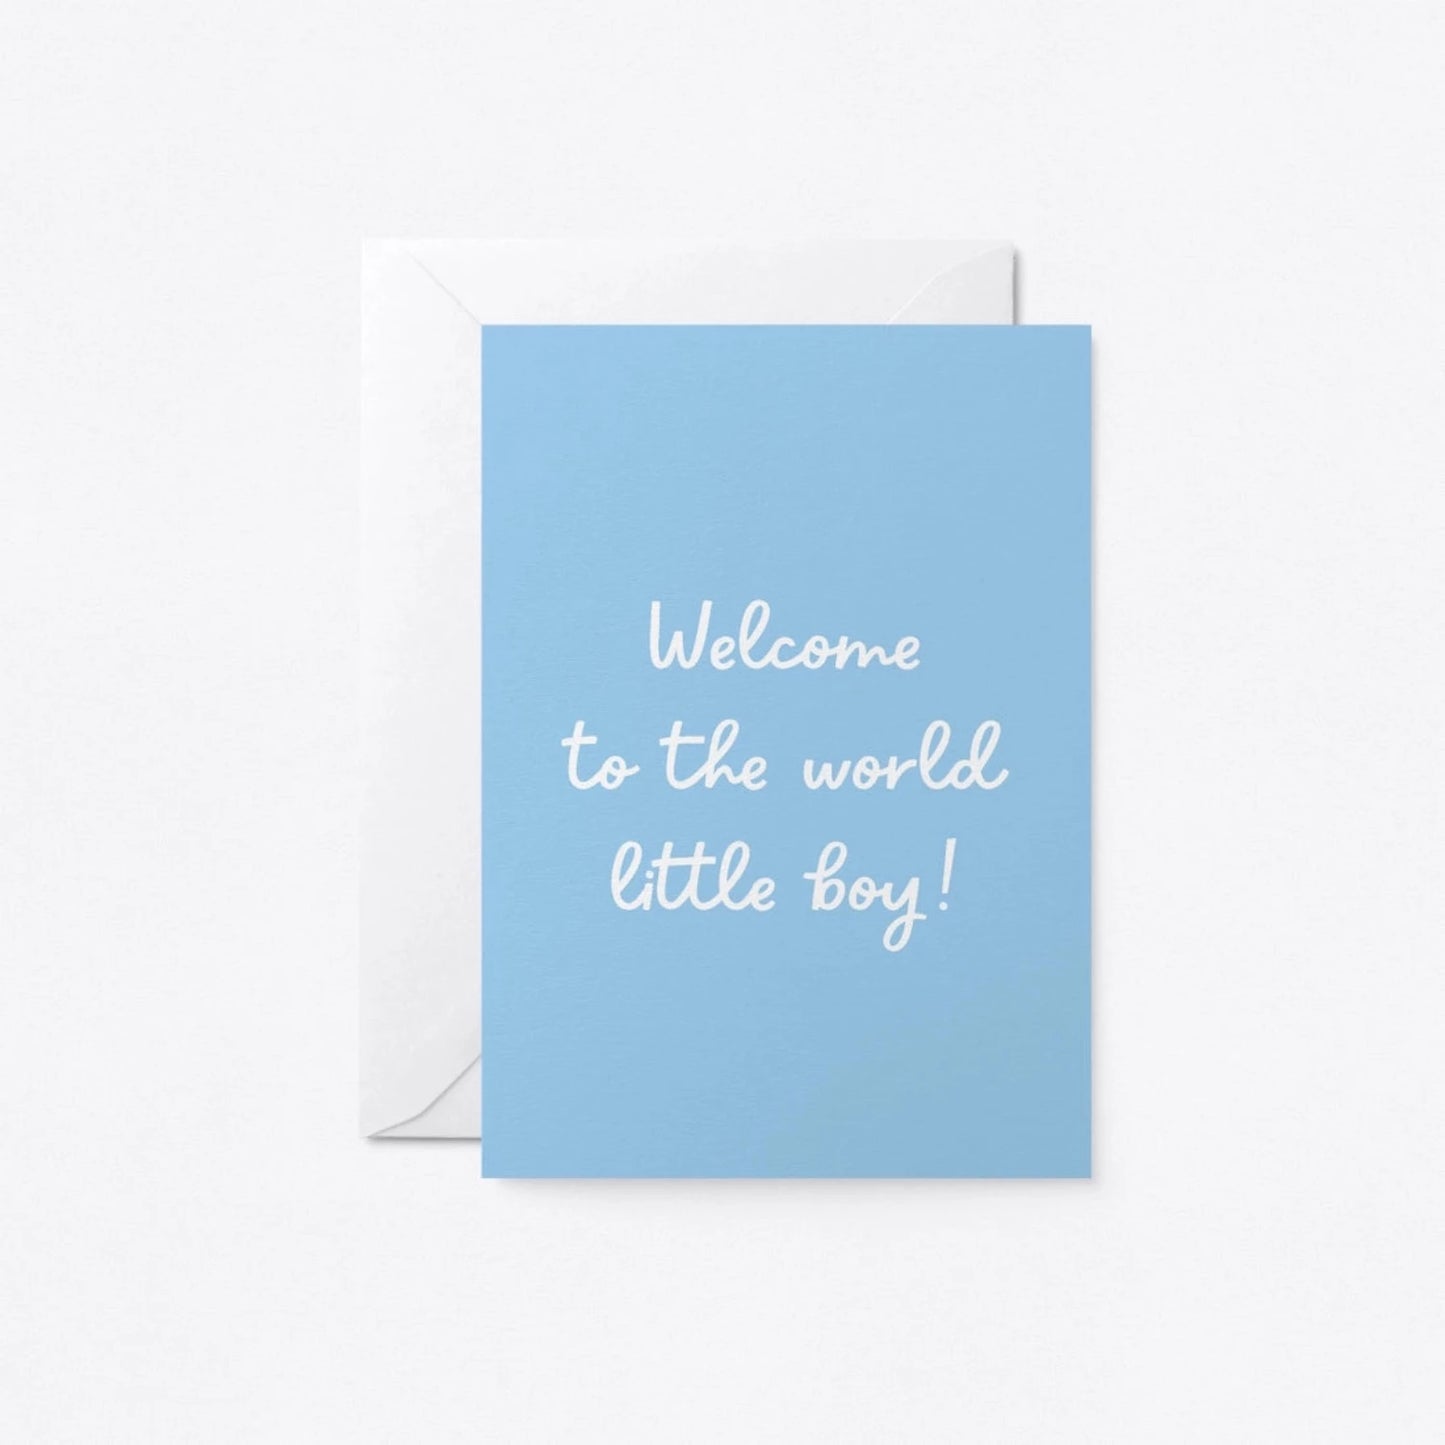 Welcome to the world little boy greetings card